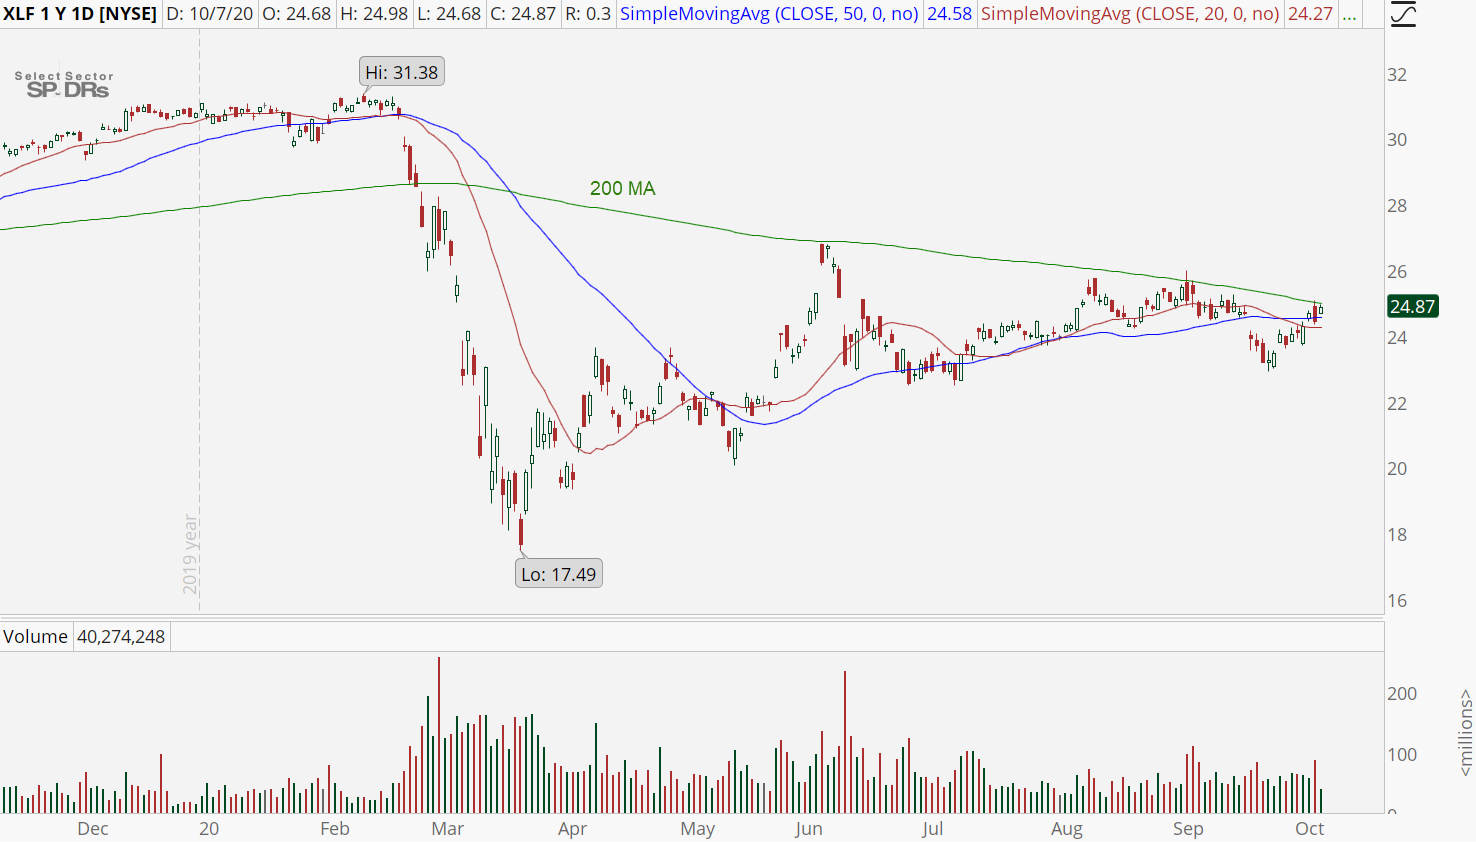 Financial Sector (XLF) chart showing 200 MA as resistance